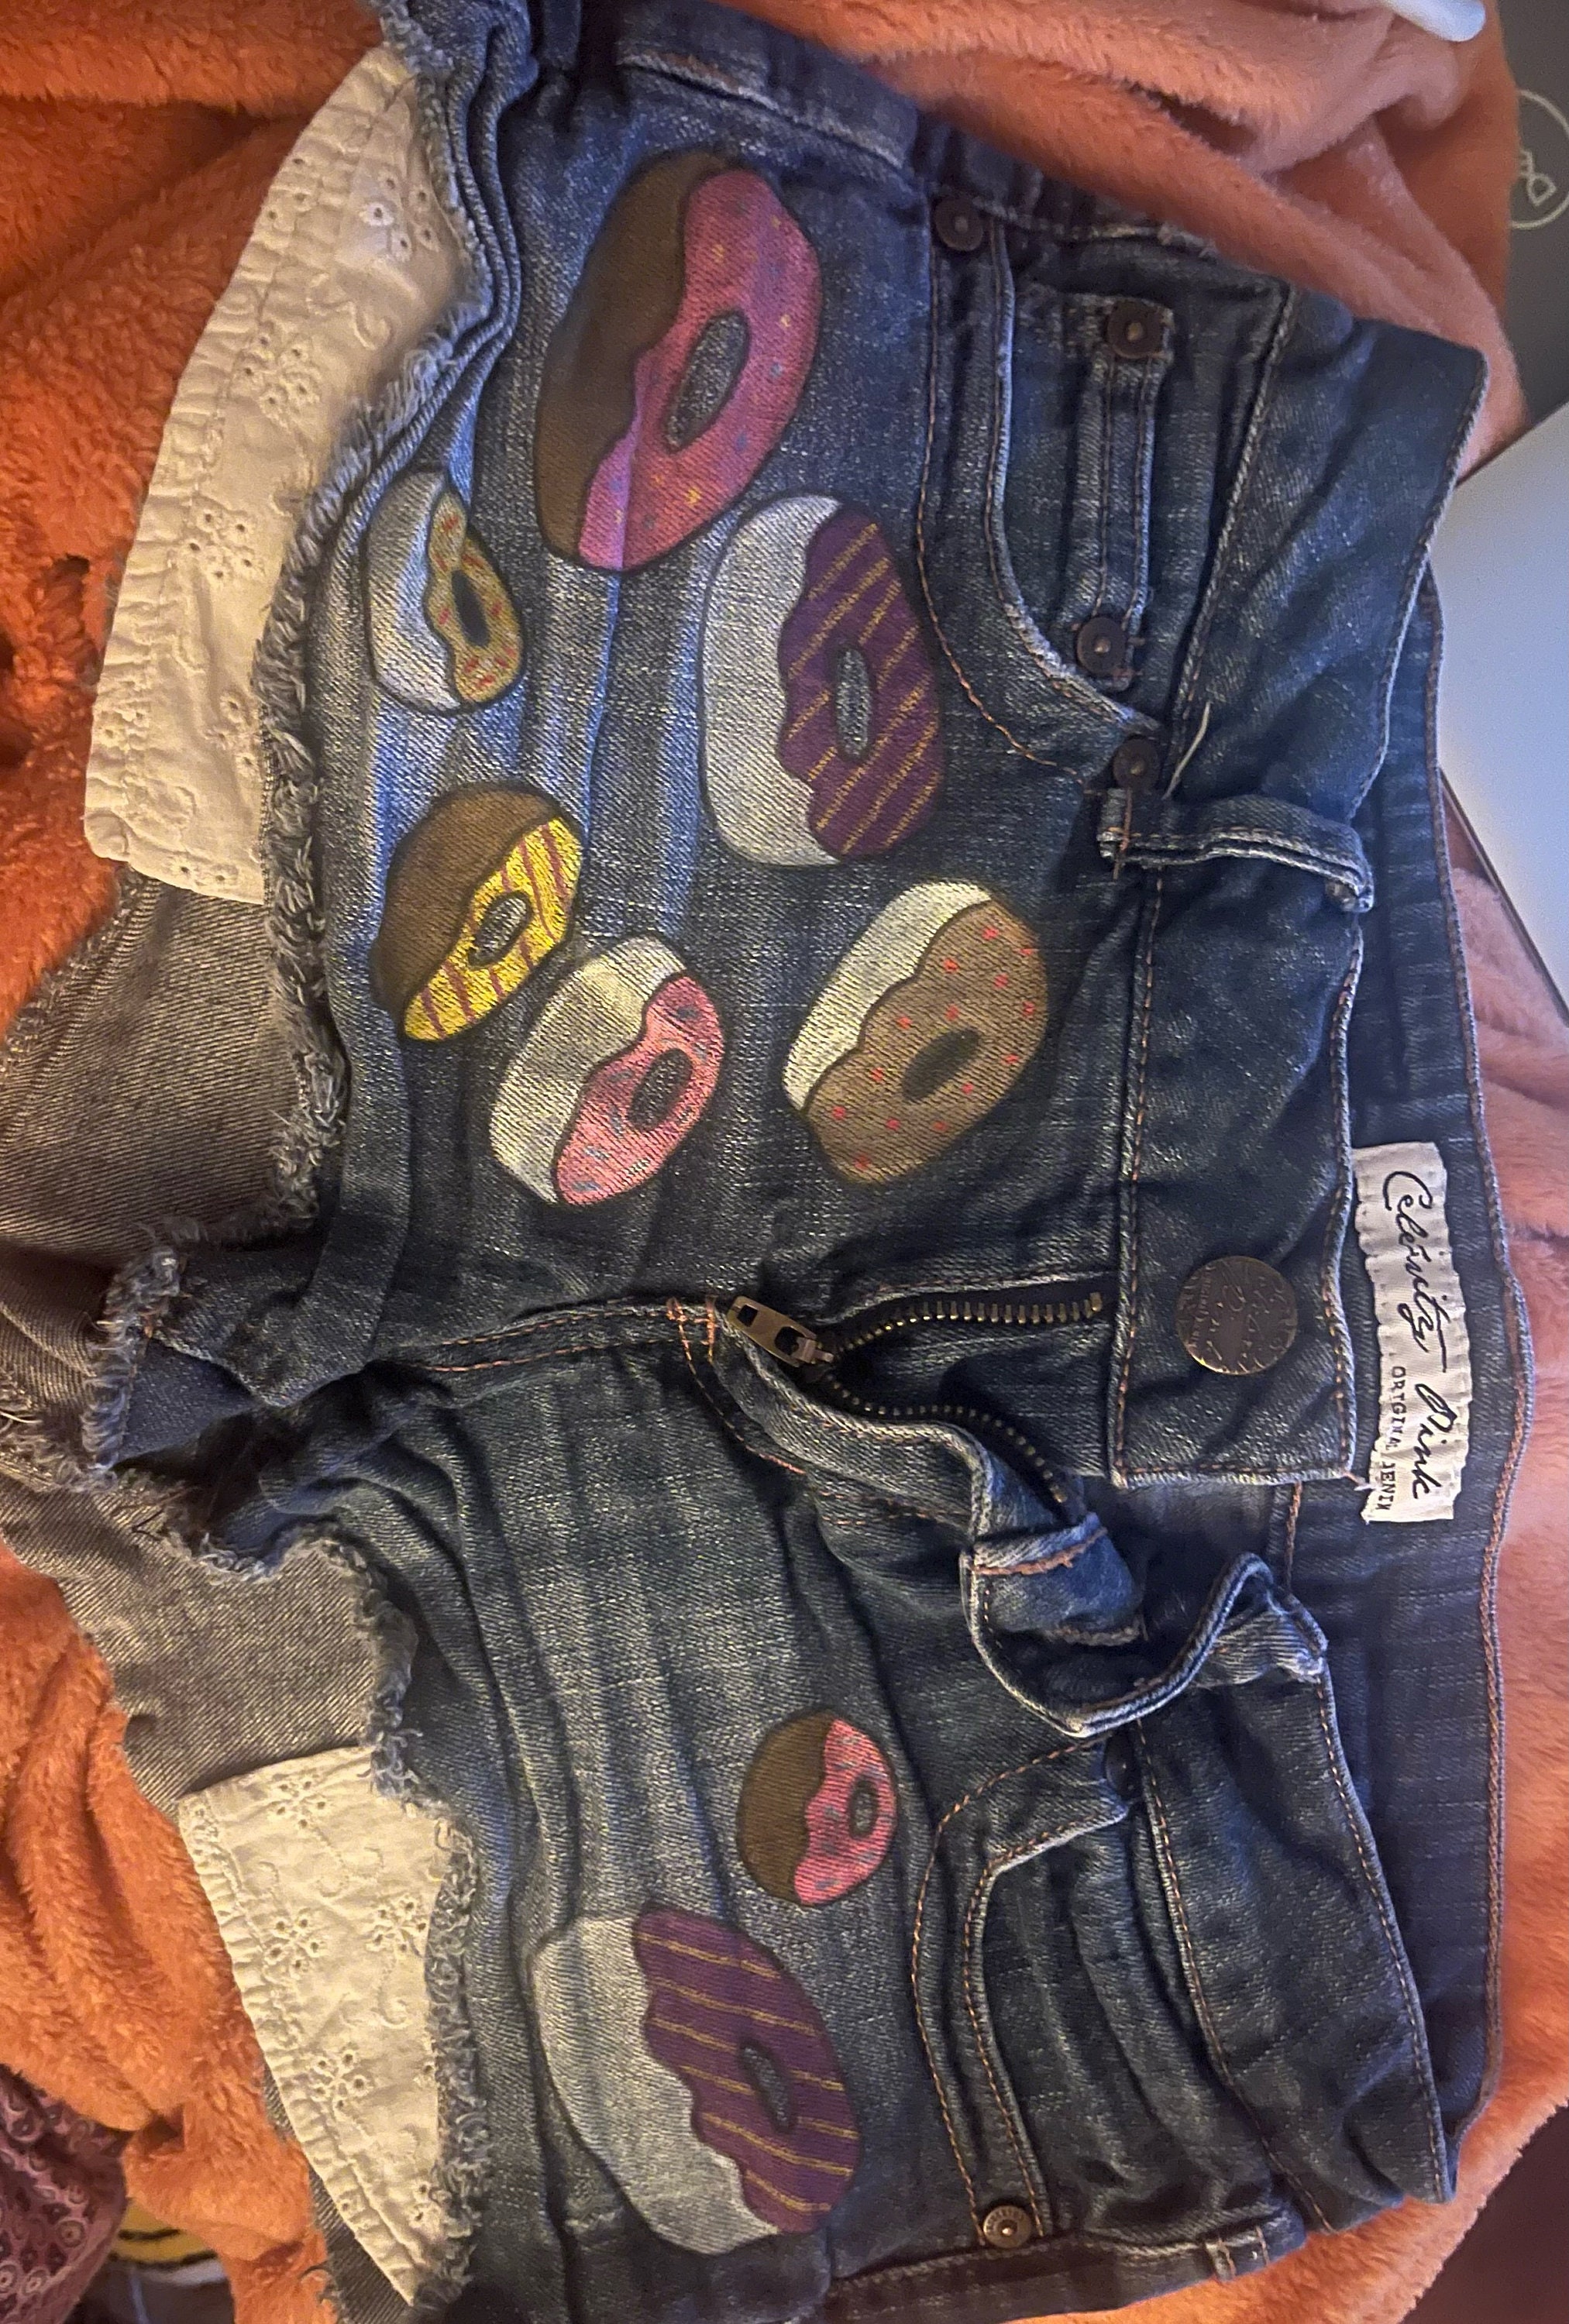 Cobrax Two Pronged Donut Jeans Button 